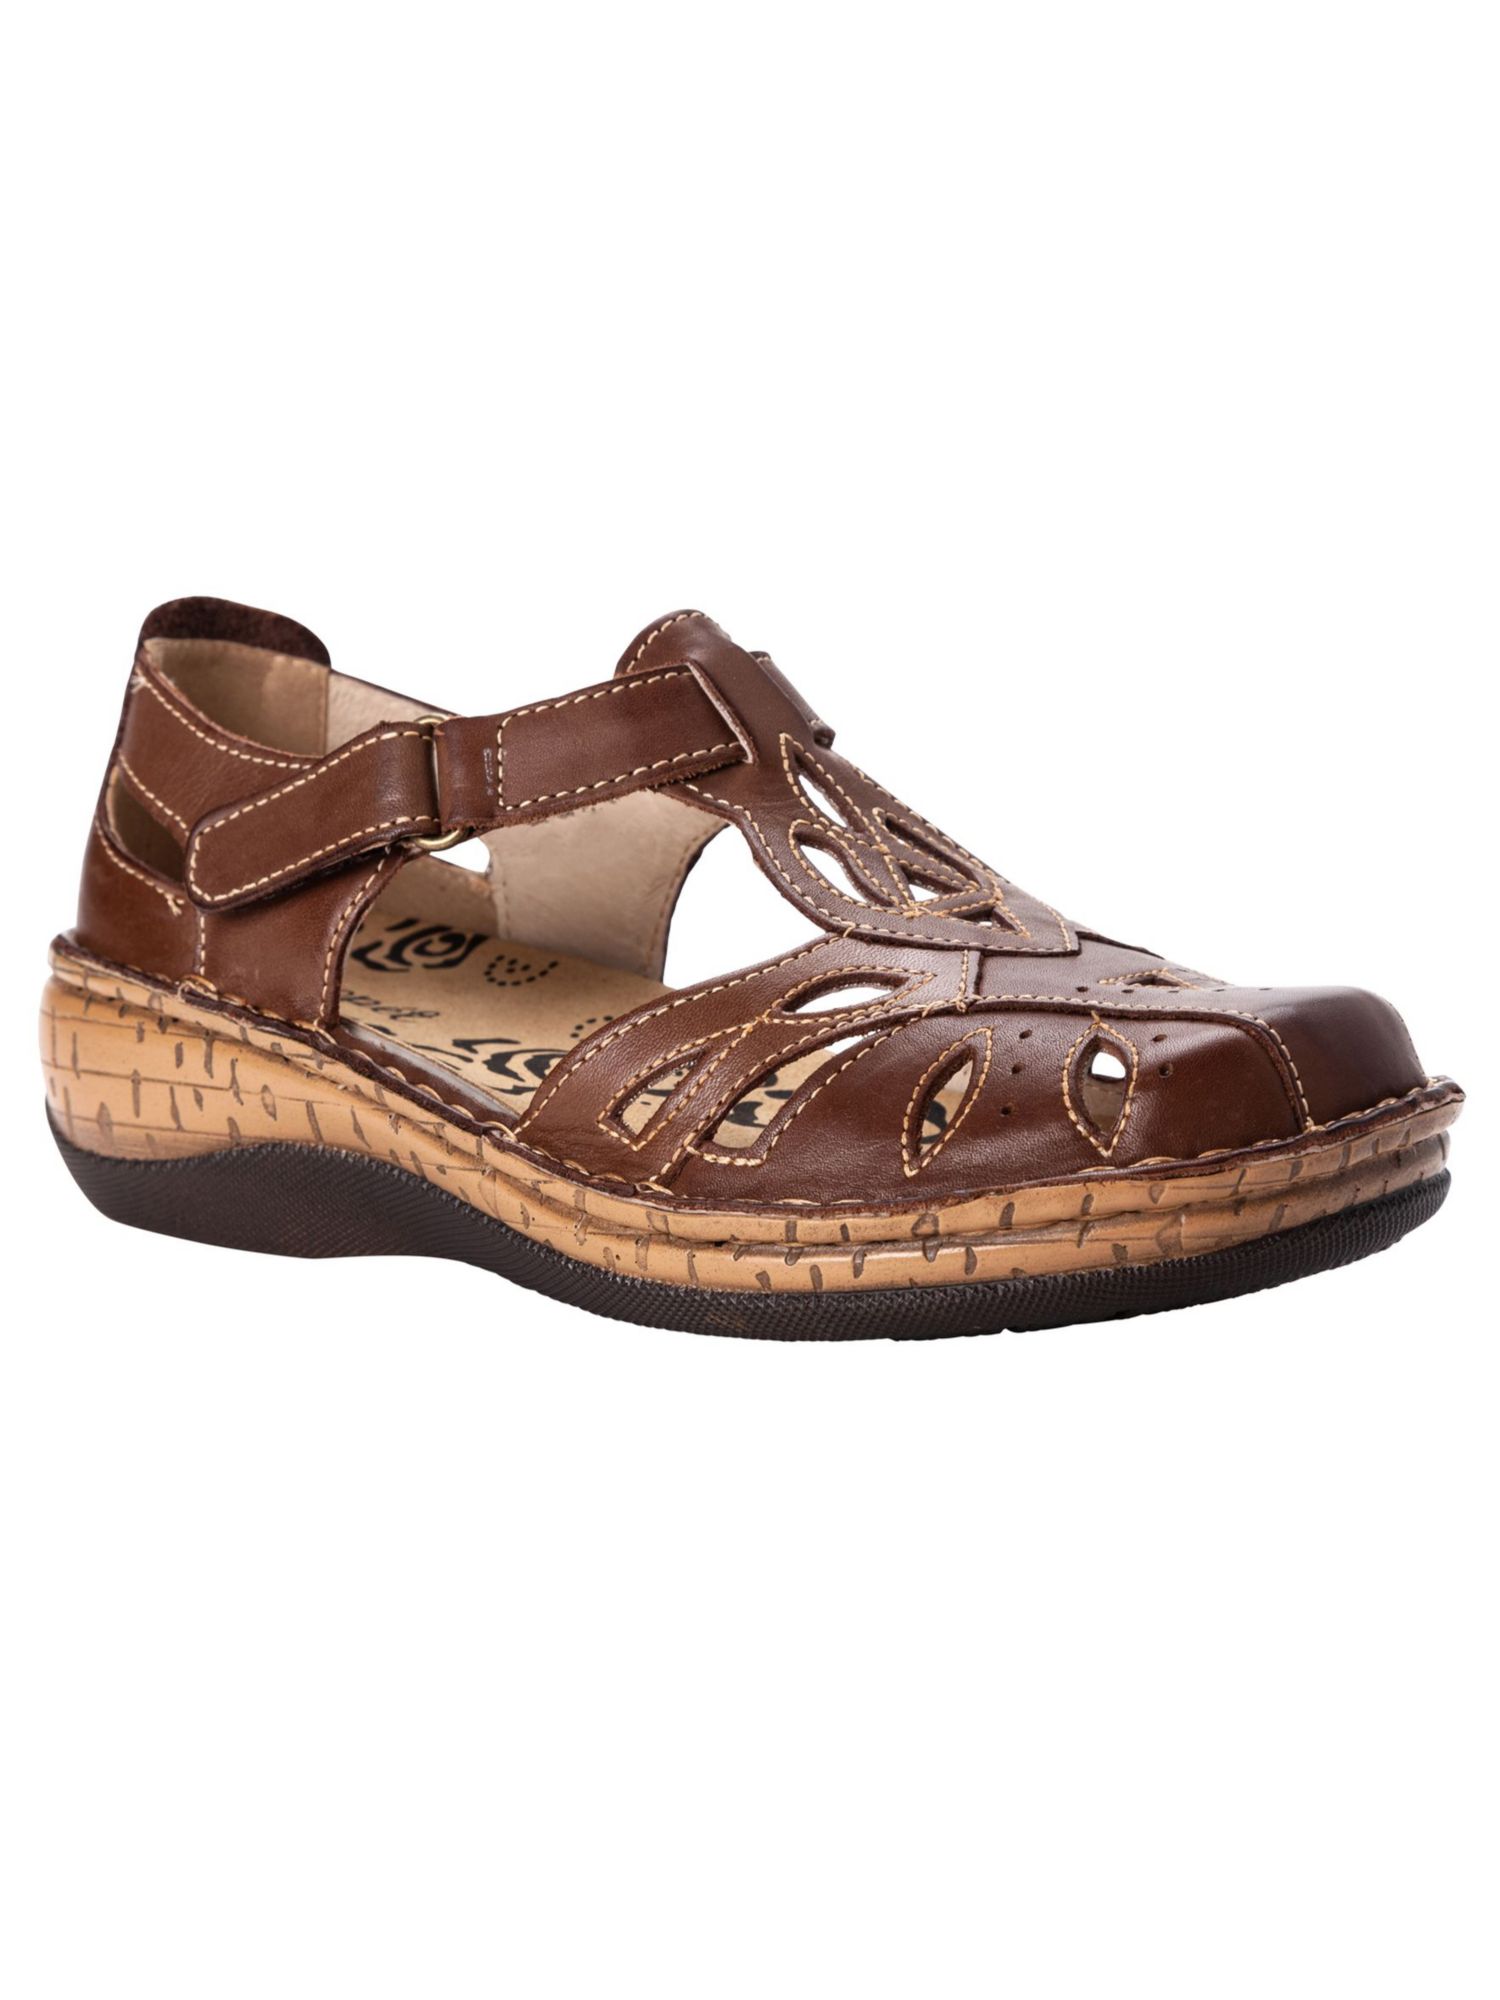 PROPET Womens Brown Contrast Stitching Cut-Out Detail Non-Slip Comfort Sandal Round Toe Wedge Leather Flats 11 M